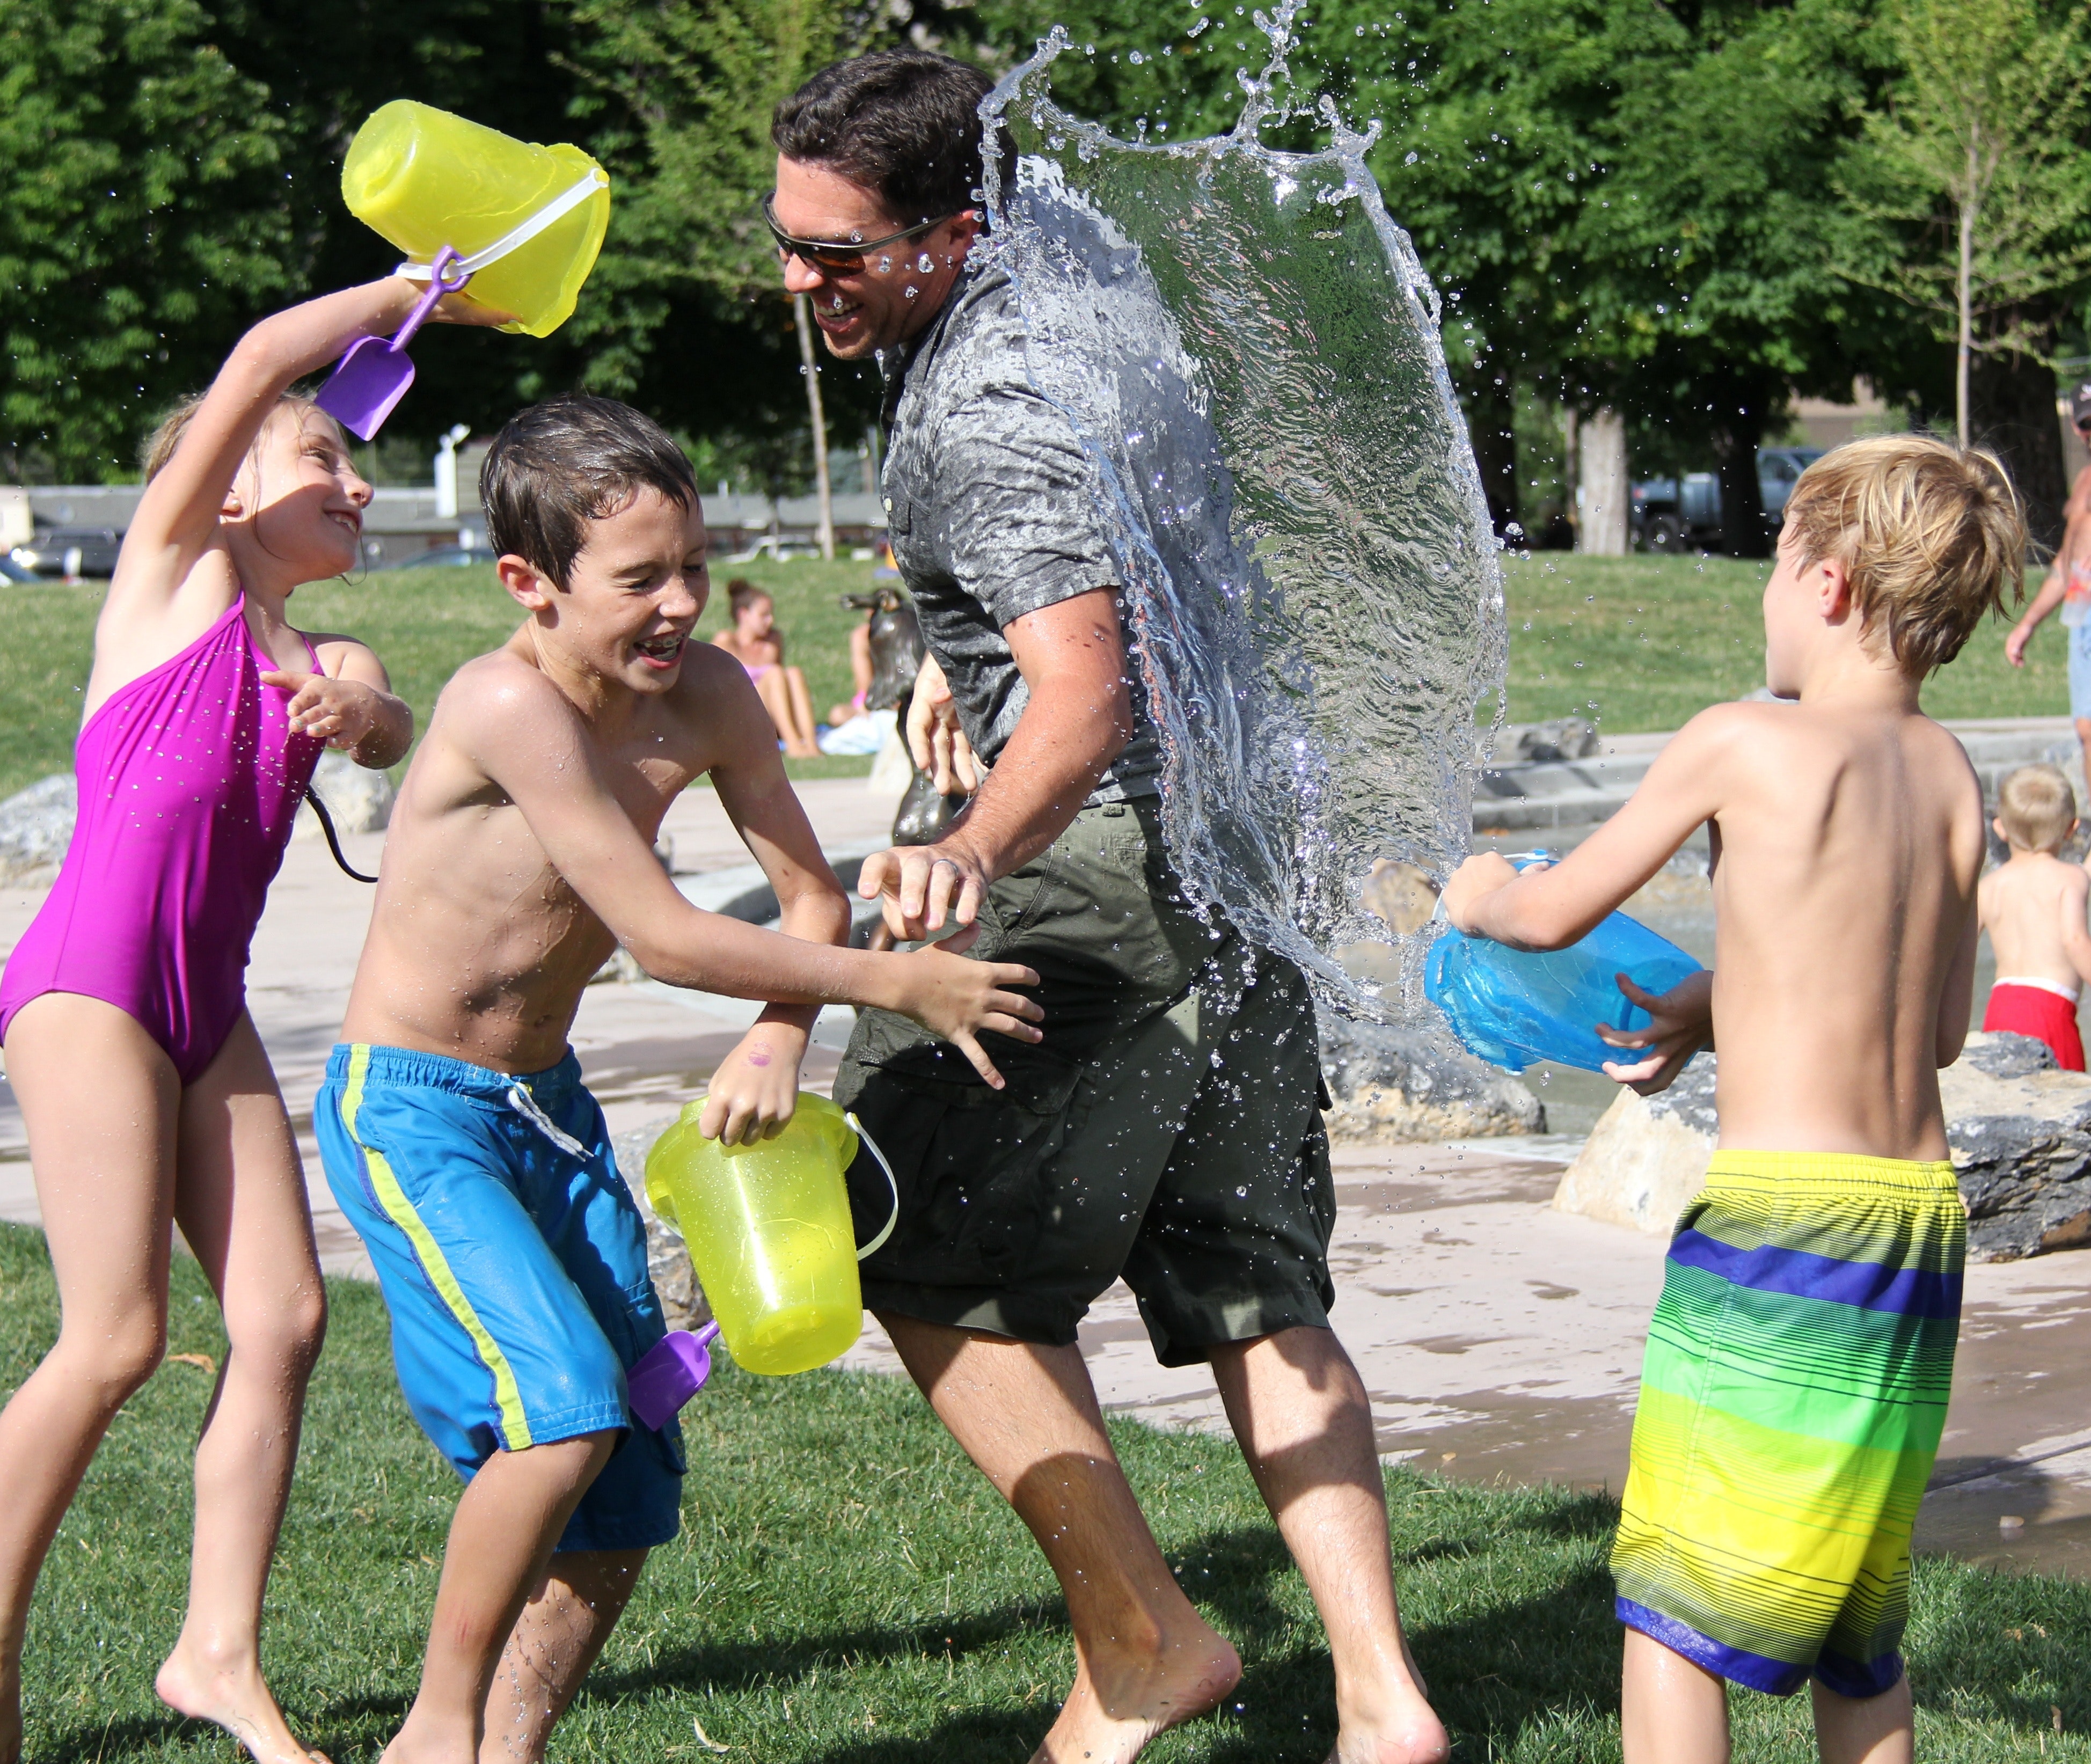 Kid's Plating Water on Grass Field during Daytime, Boys, Outdoors, Water fight, Water, HQ Photo